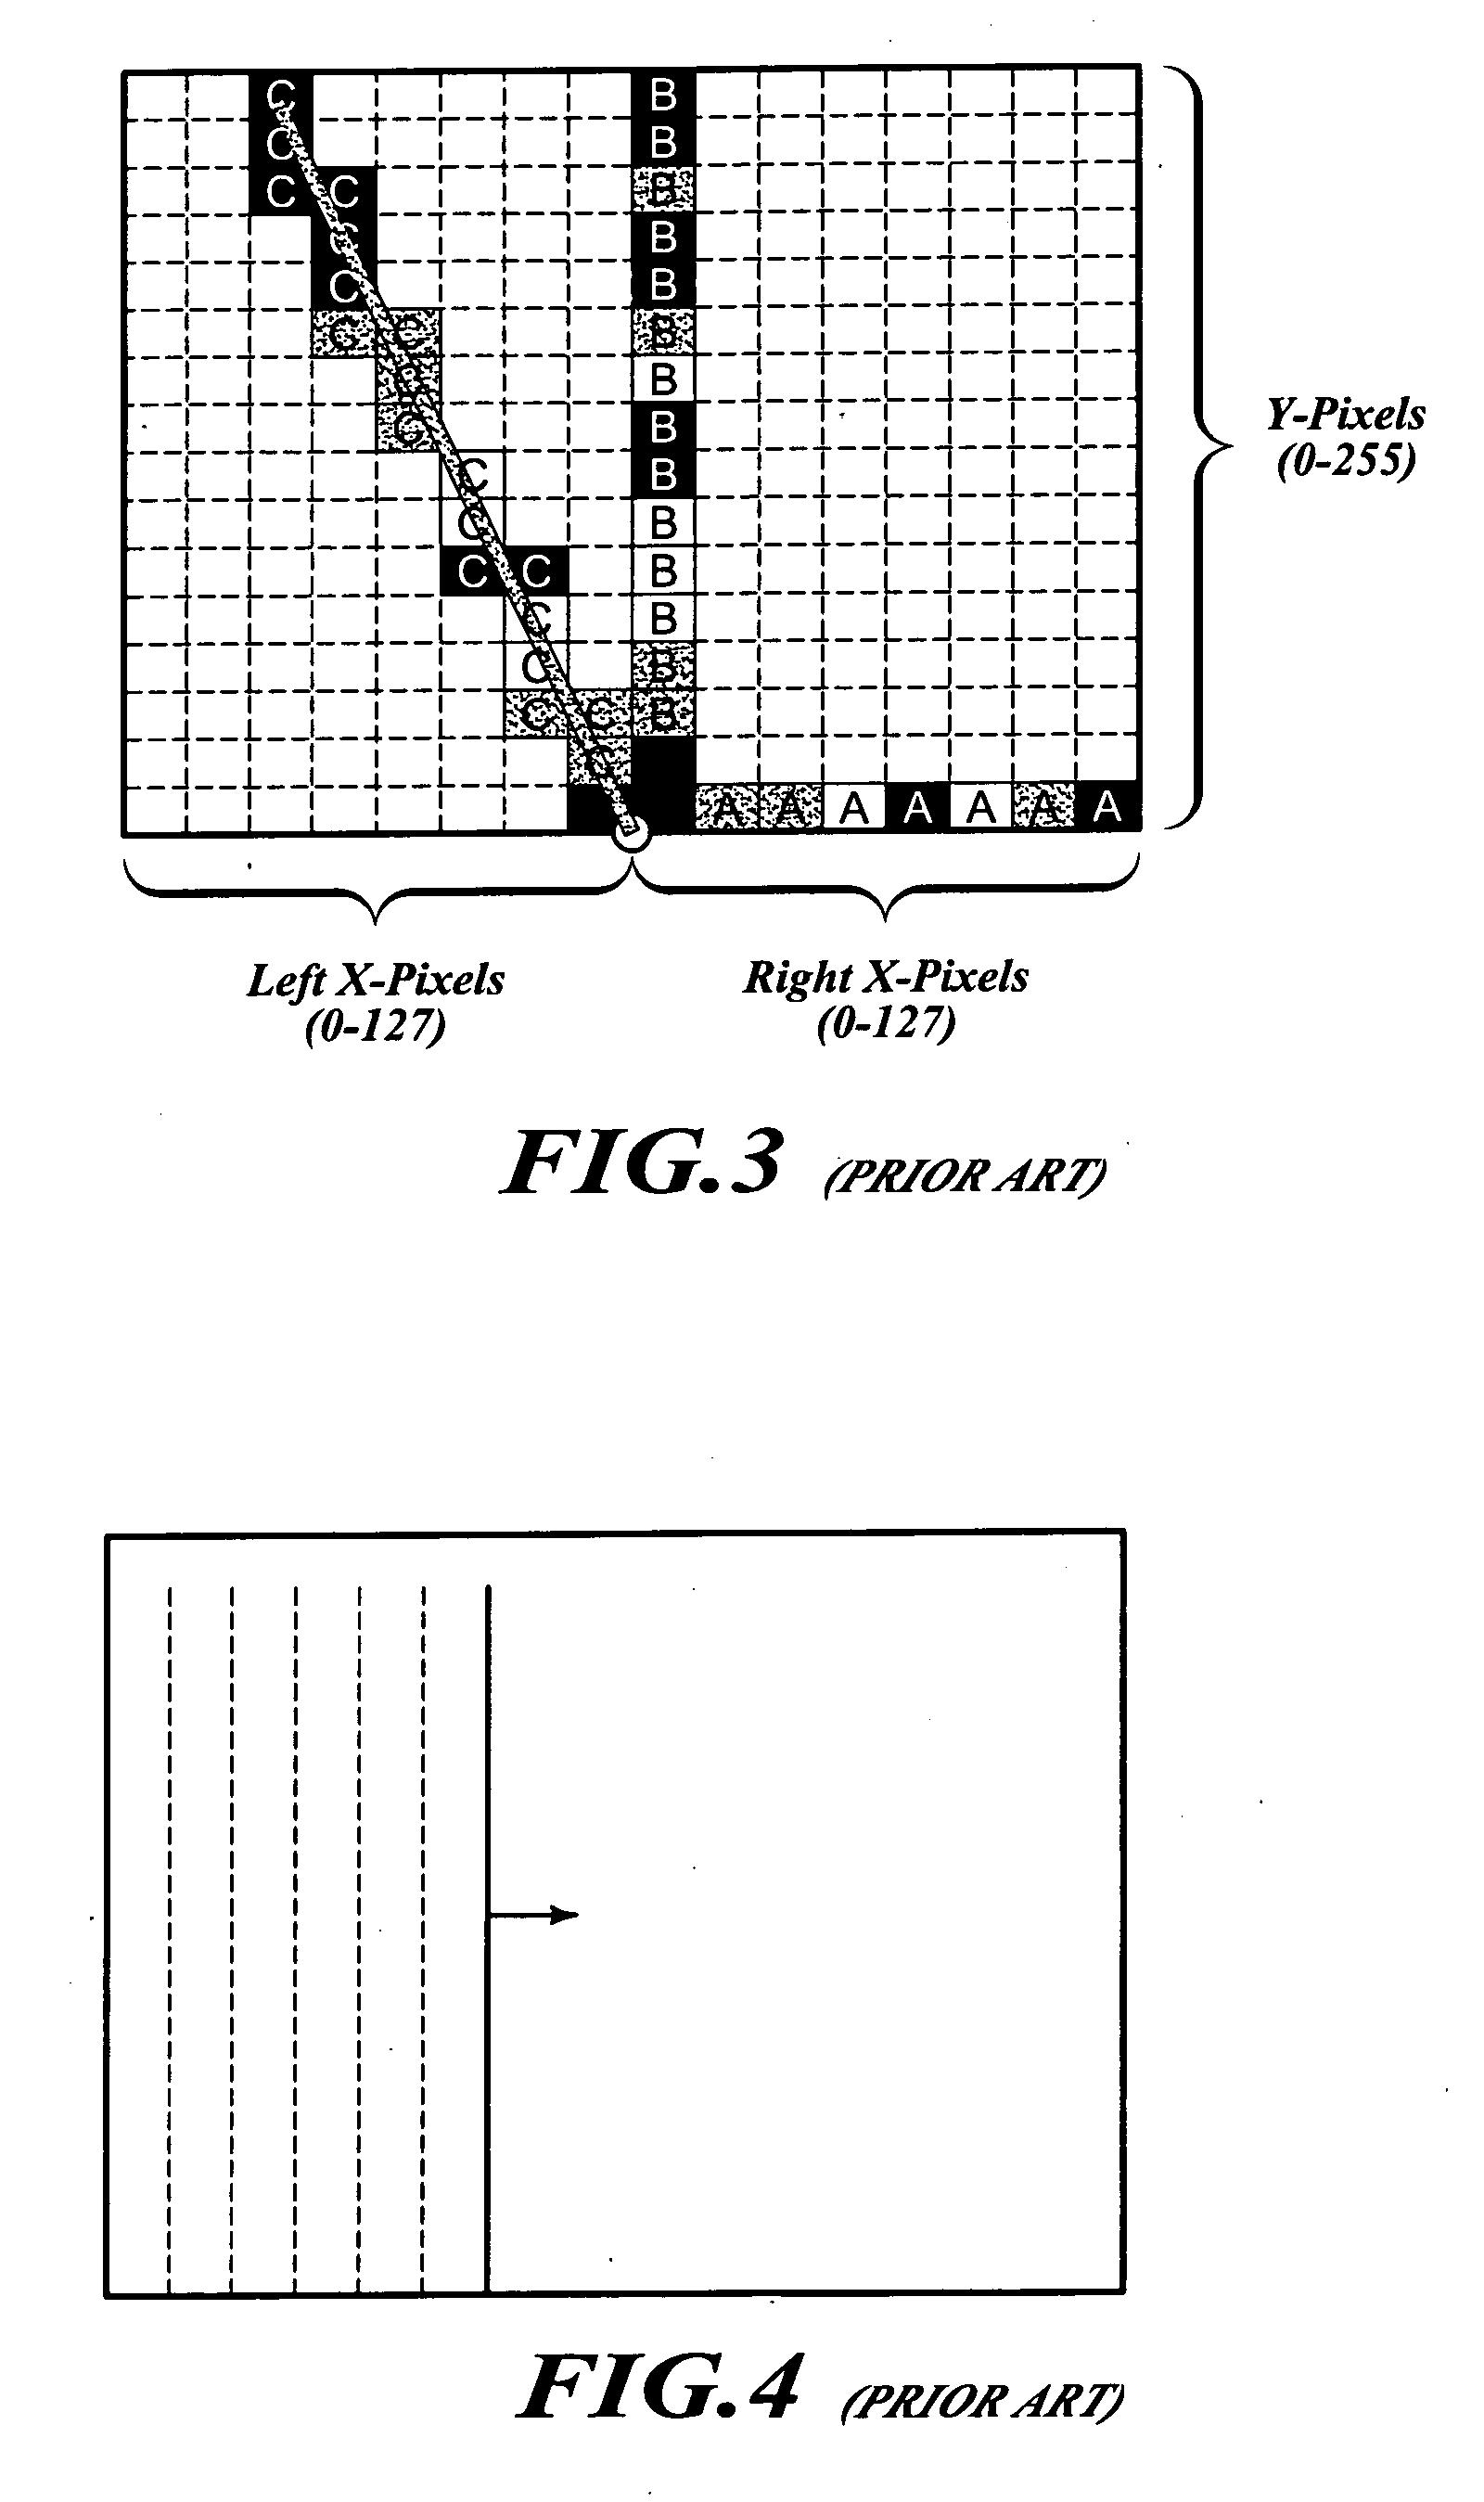 Systems and methods for rapid updating of embedded text in radar picture data